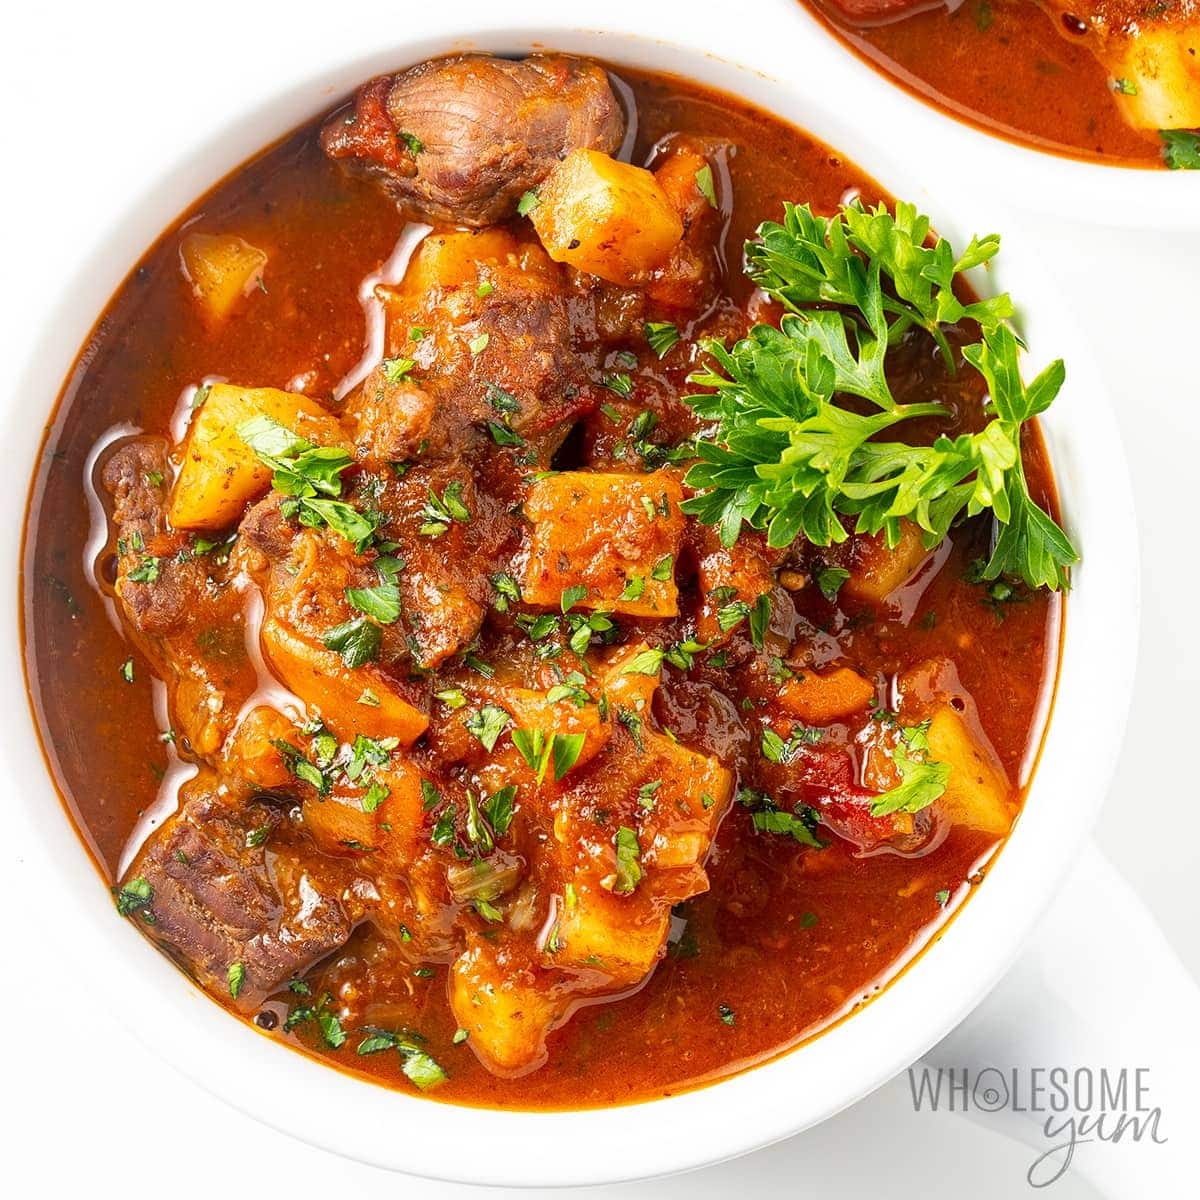 Beef stew on a white bowl with tomato sauce and potatoes garnished with fresh parsley. 